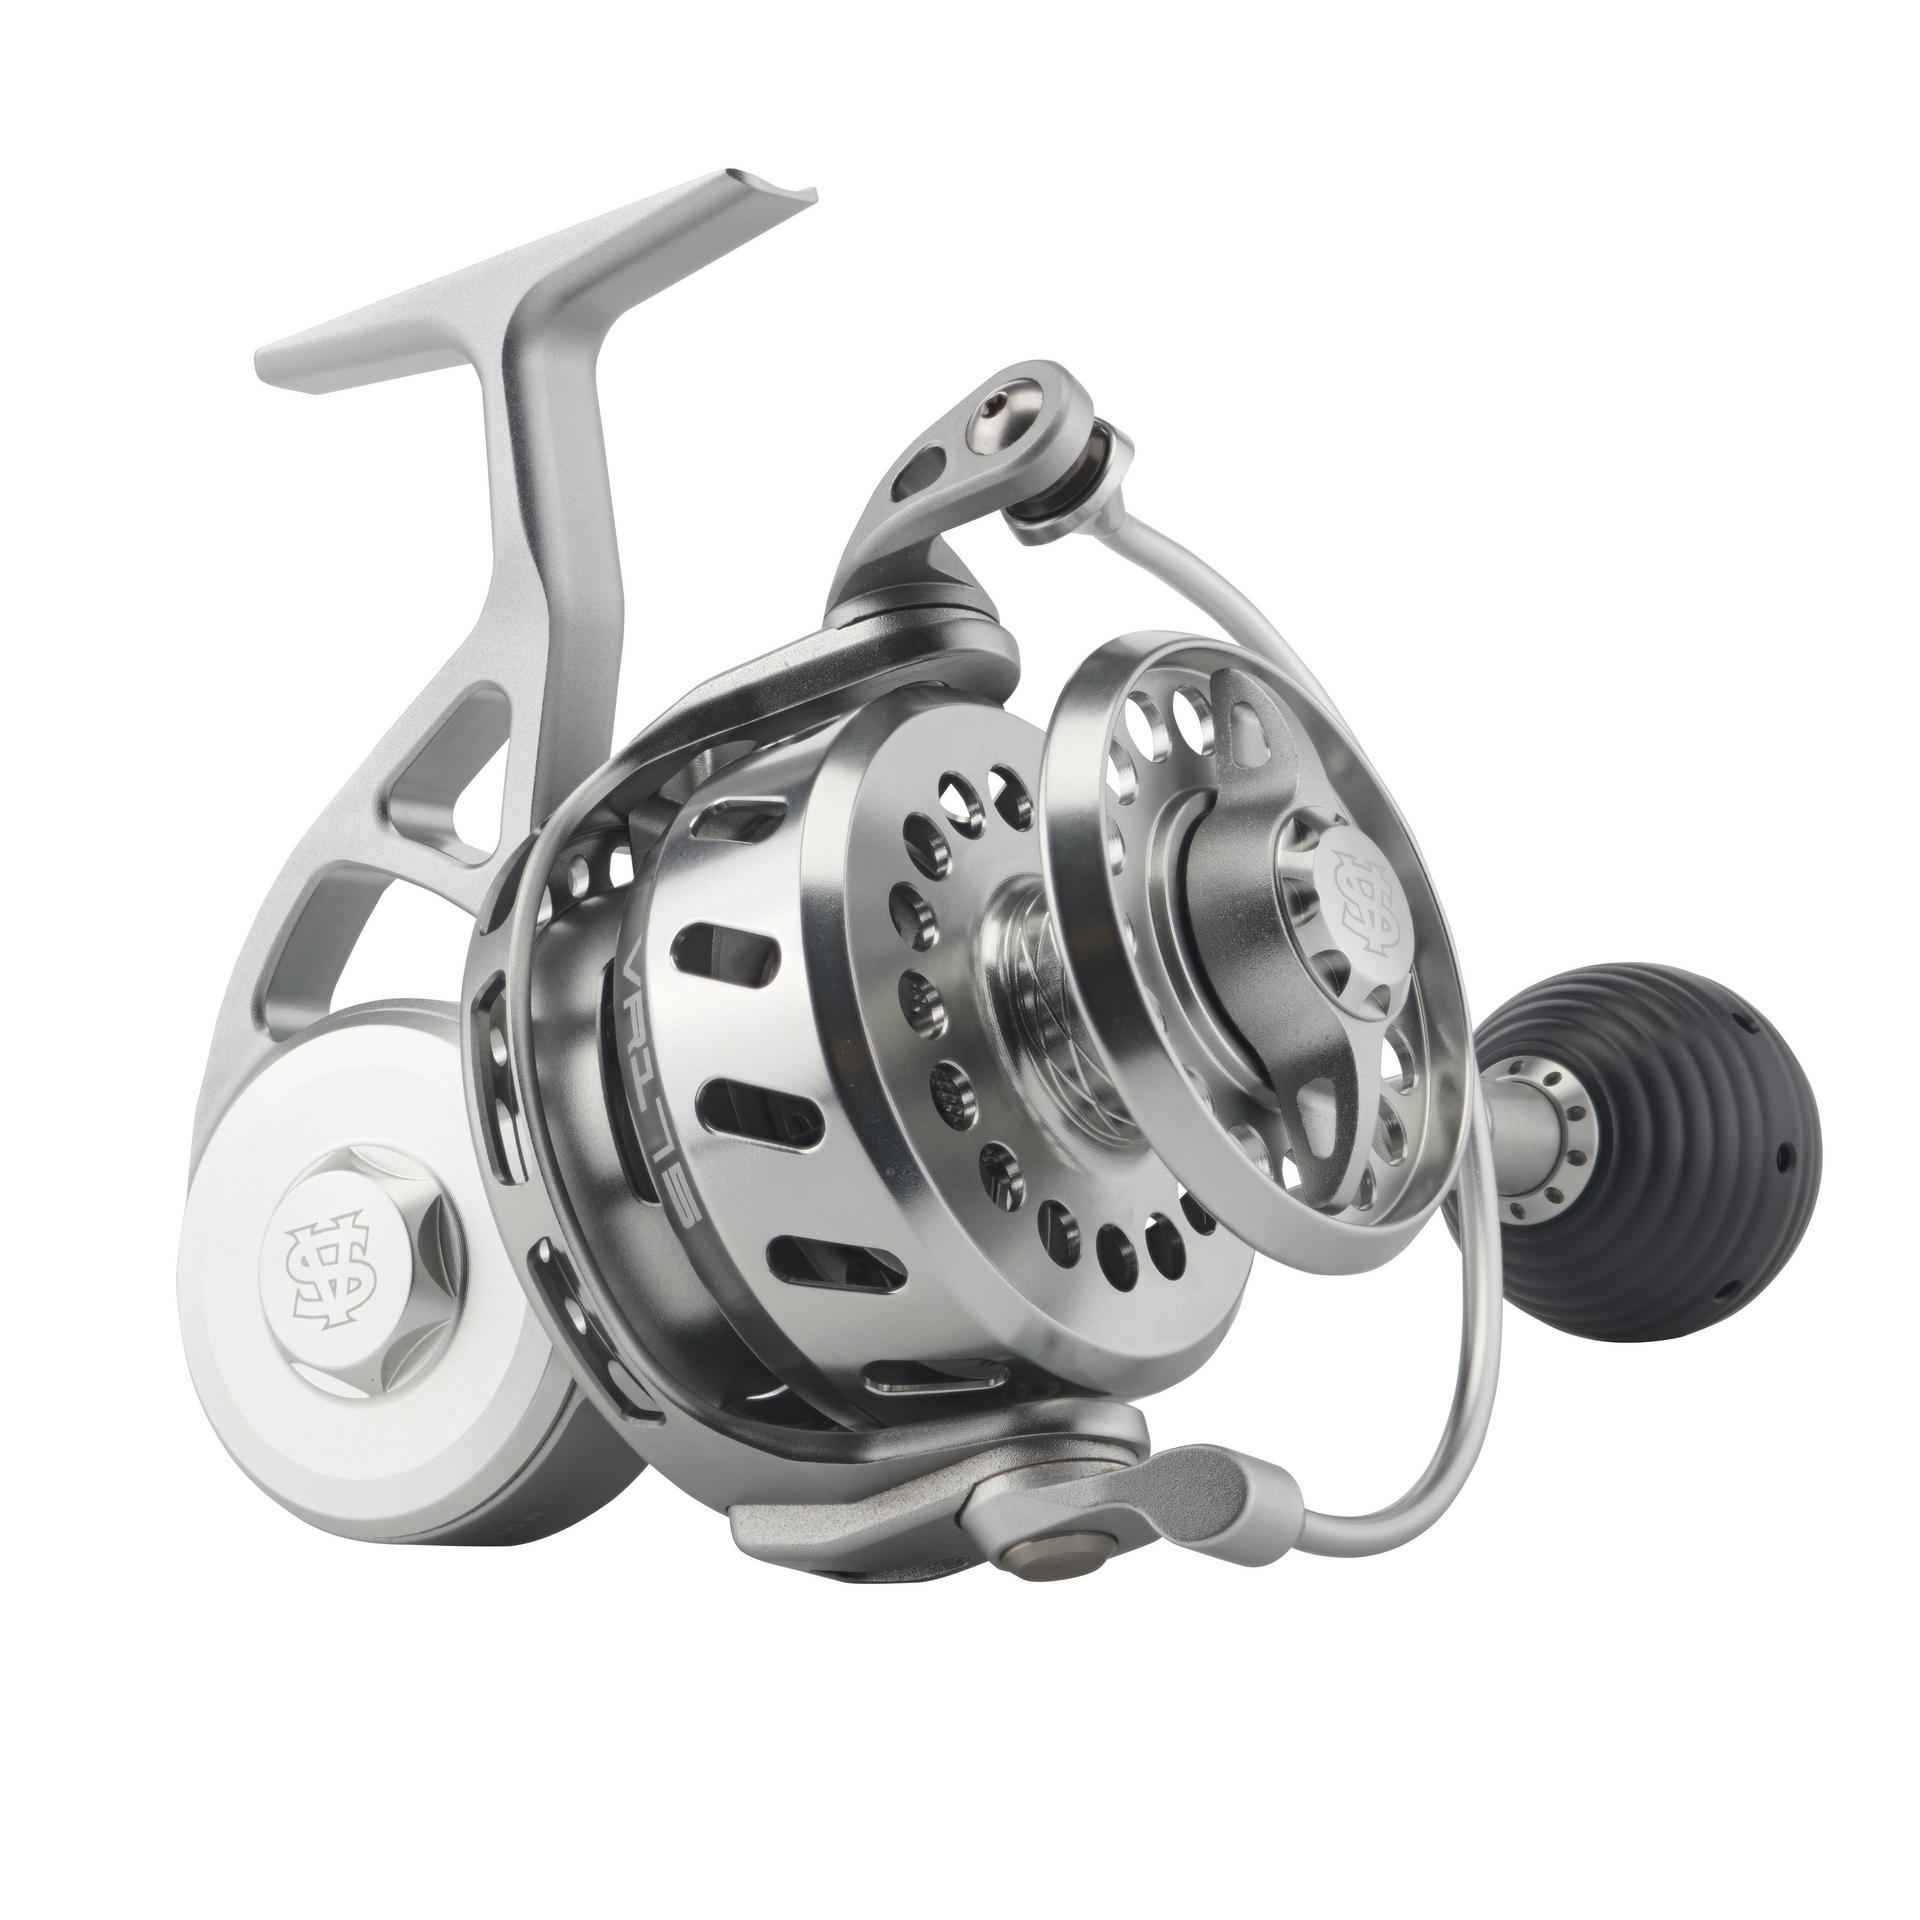 Van Staal VR50 Spinning Reel - Silver Handle On the left 854692001704 